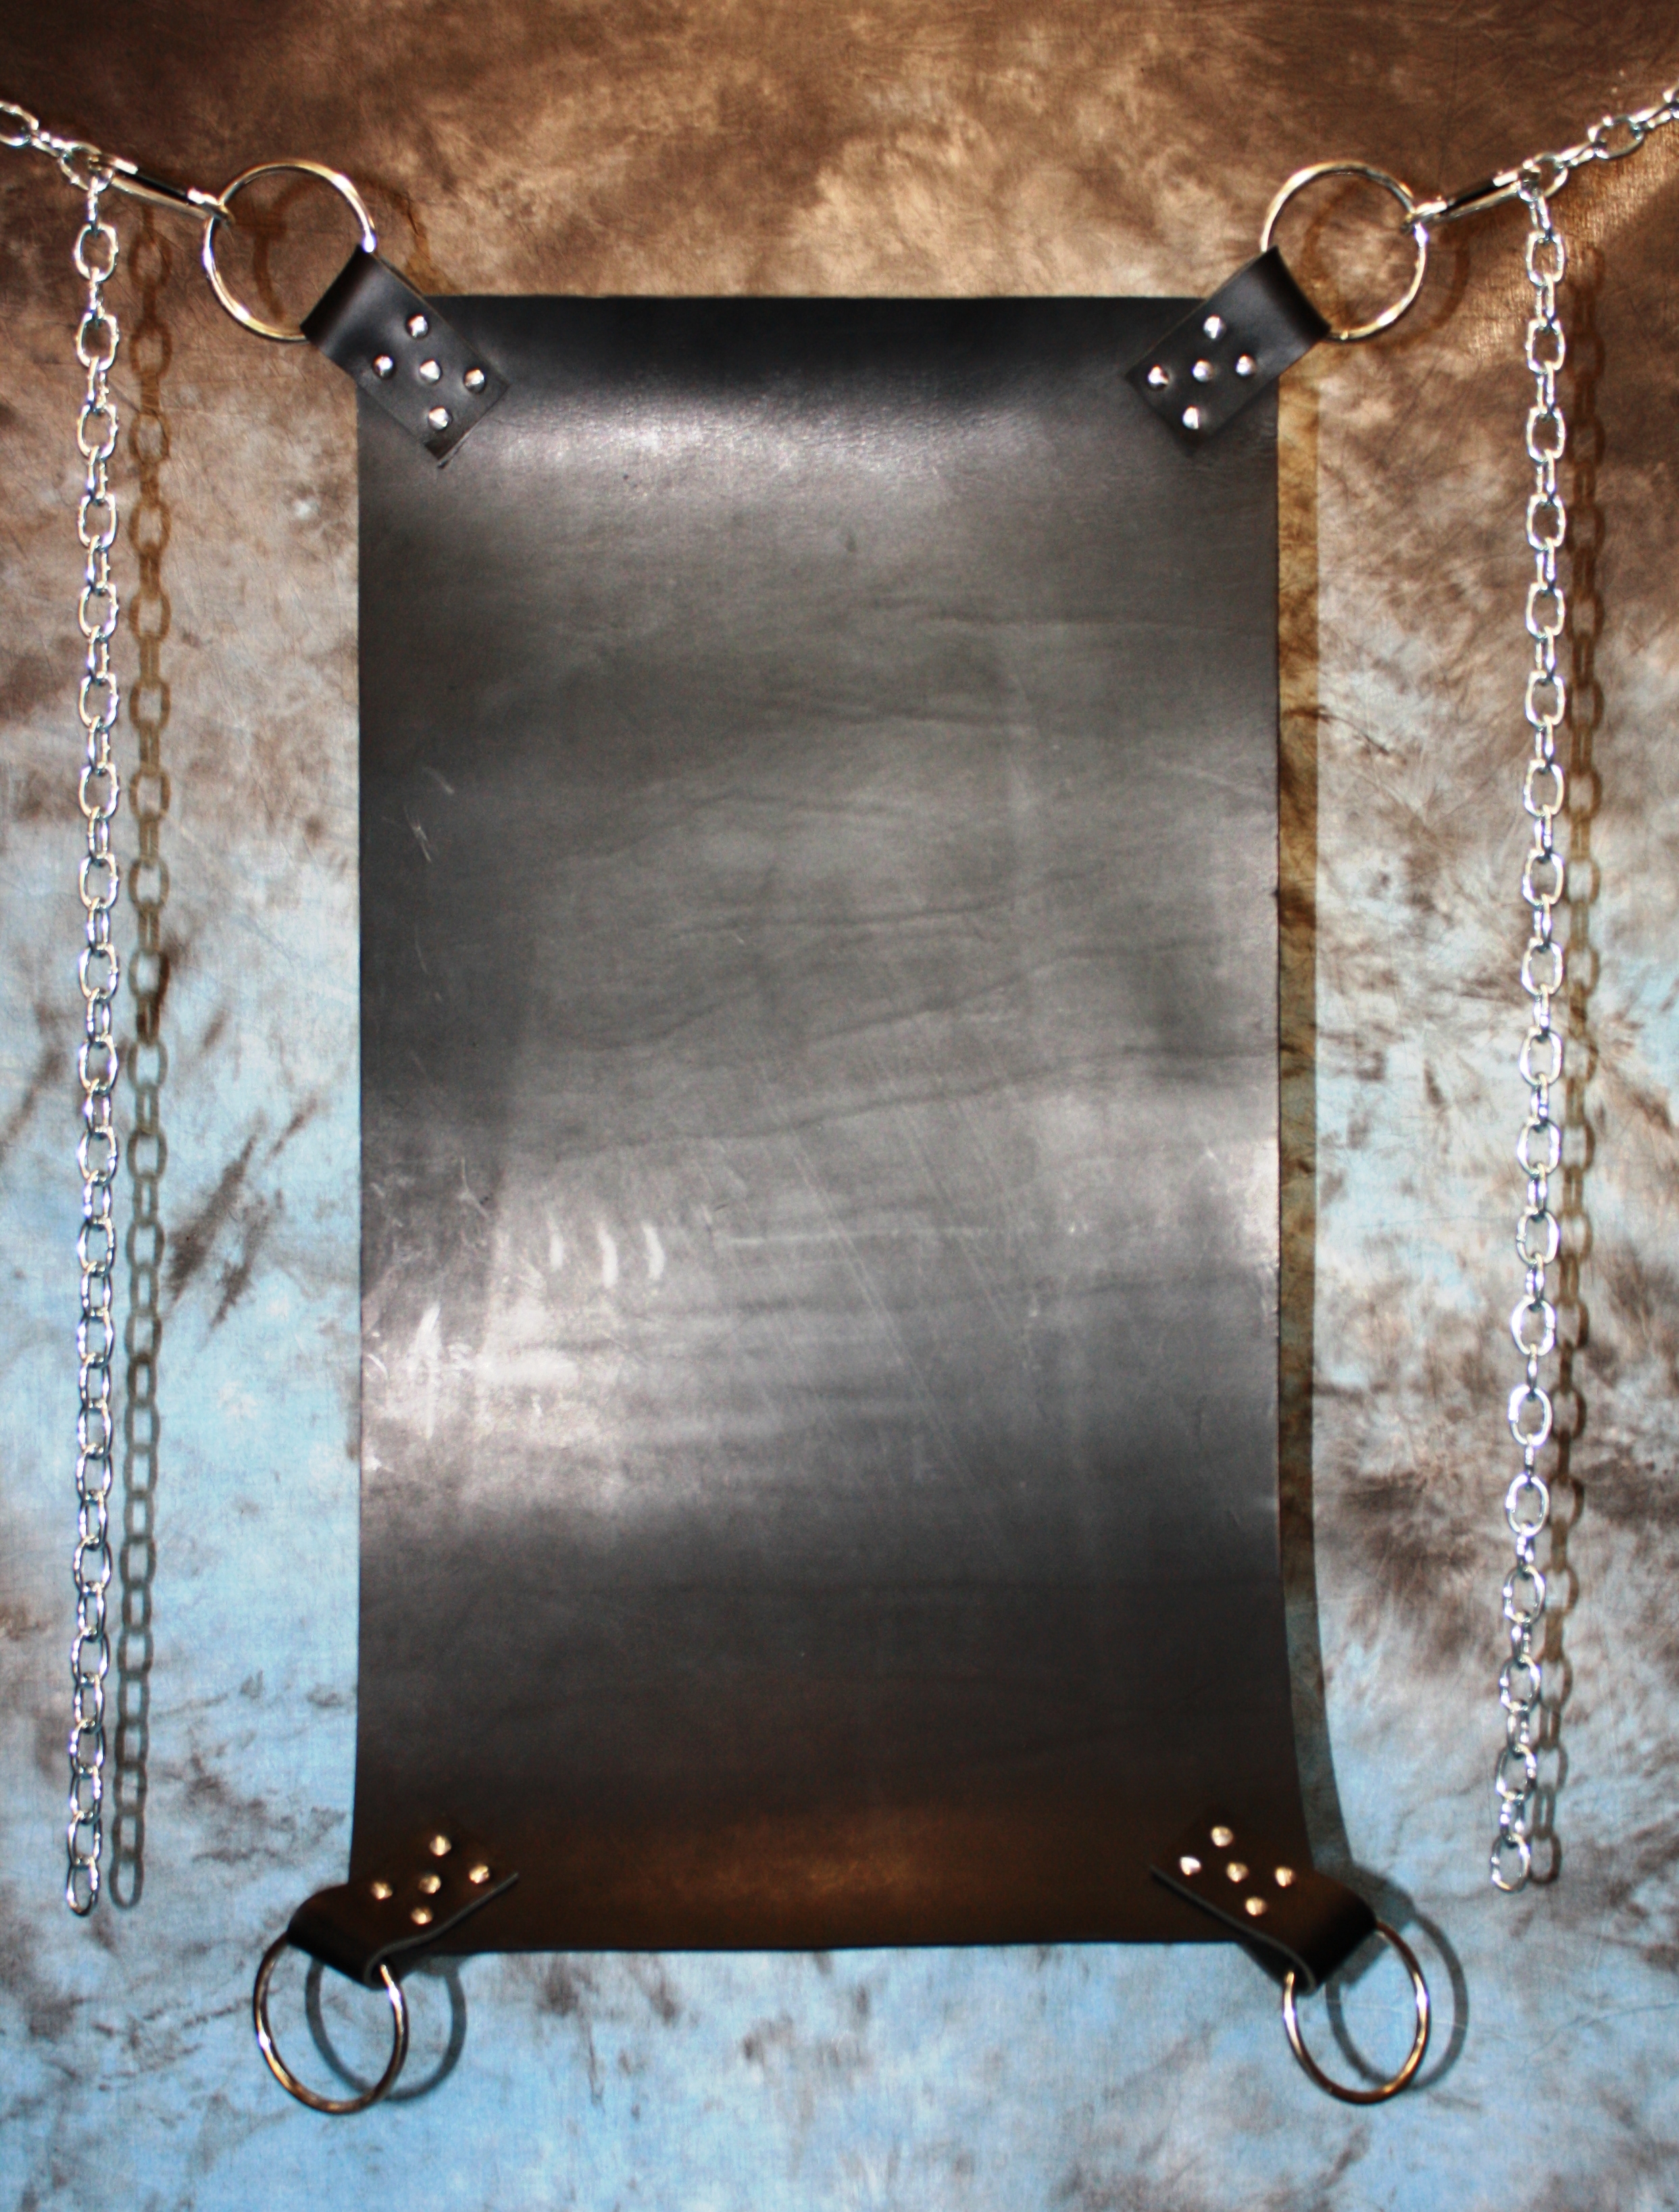 leather sex swing sling